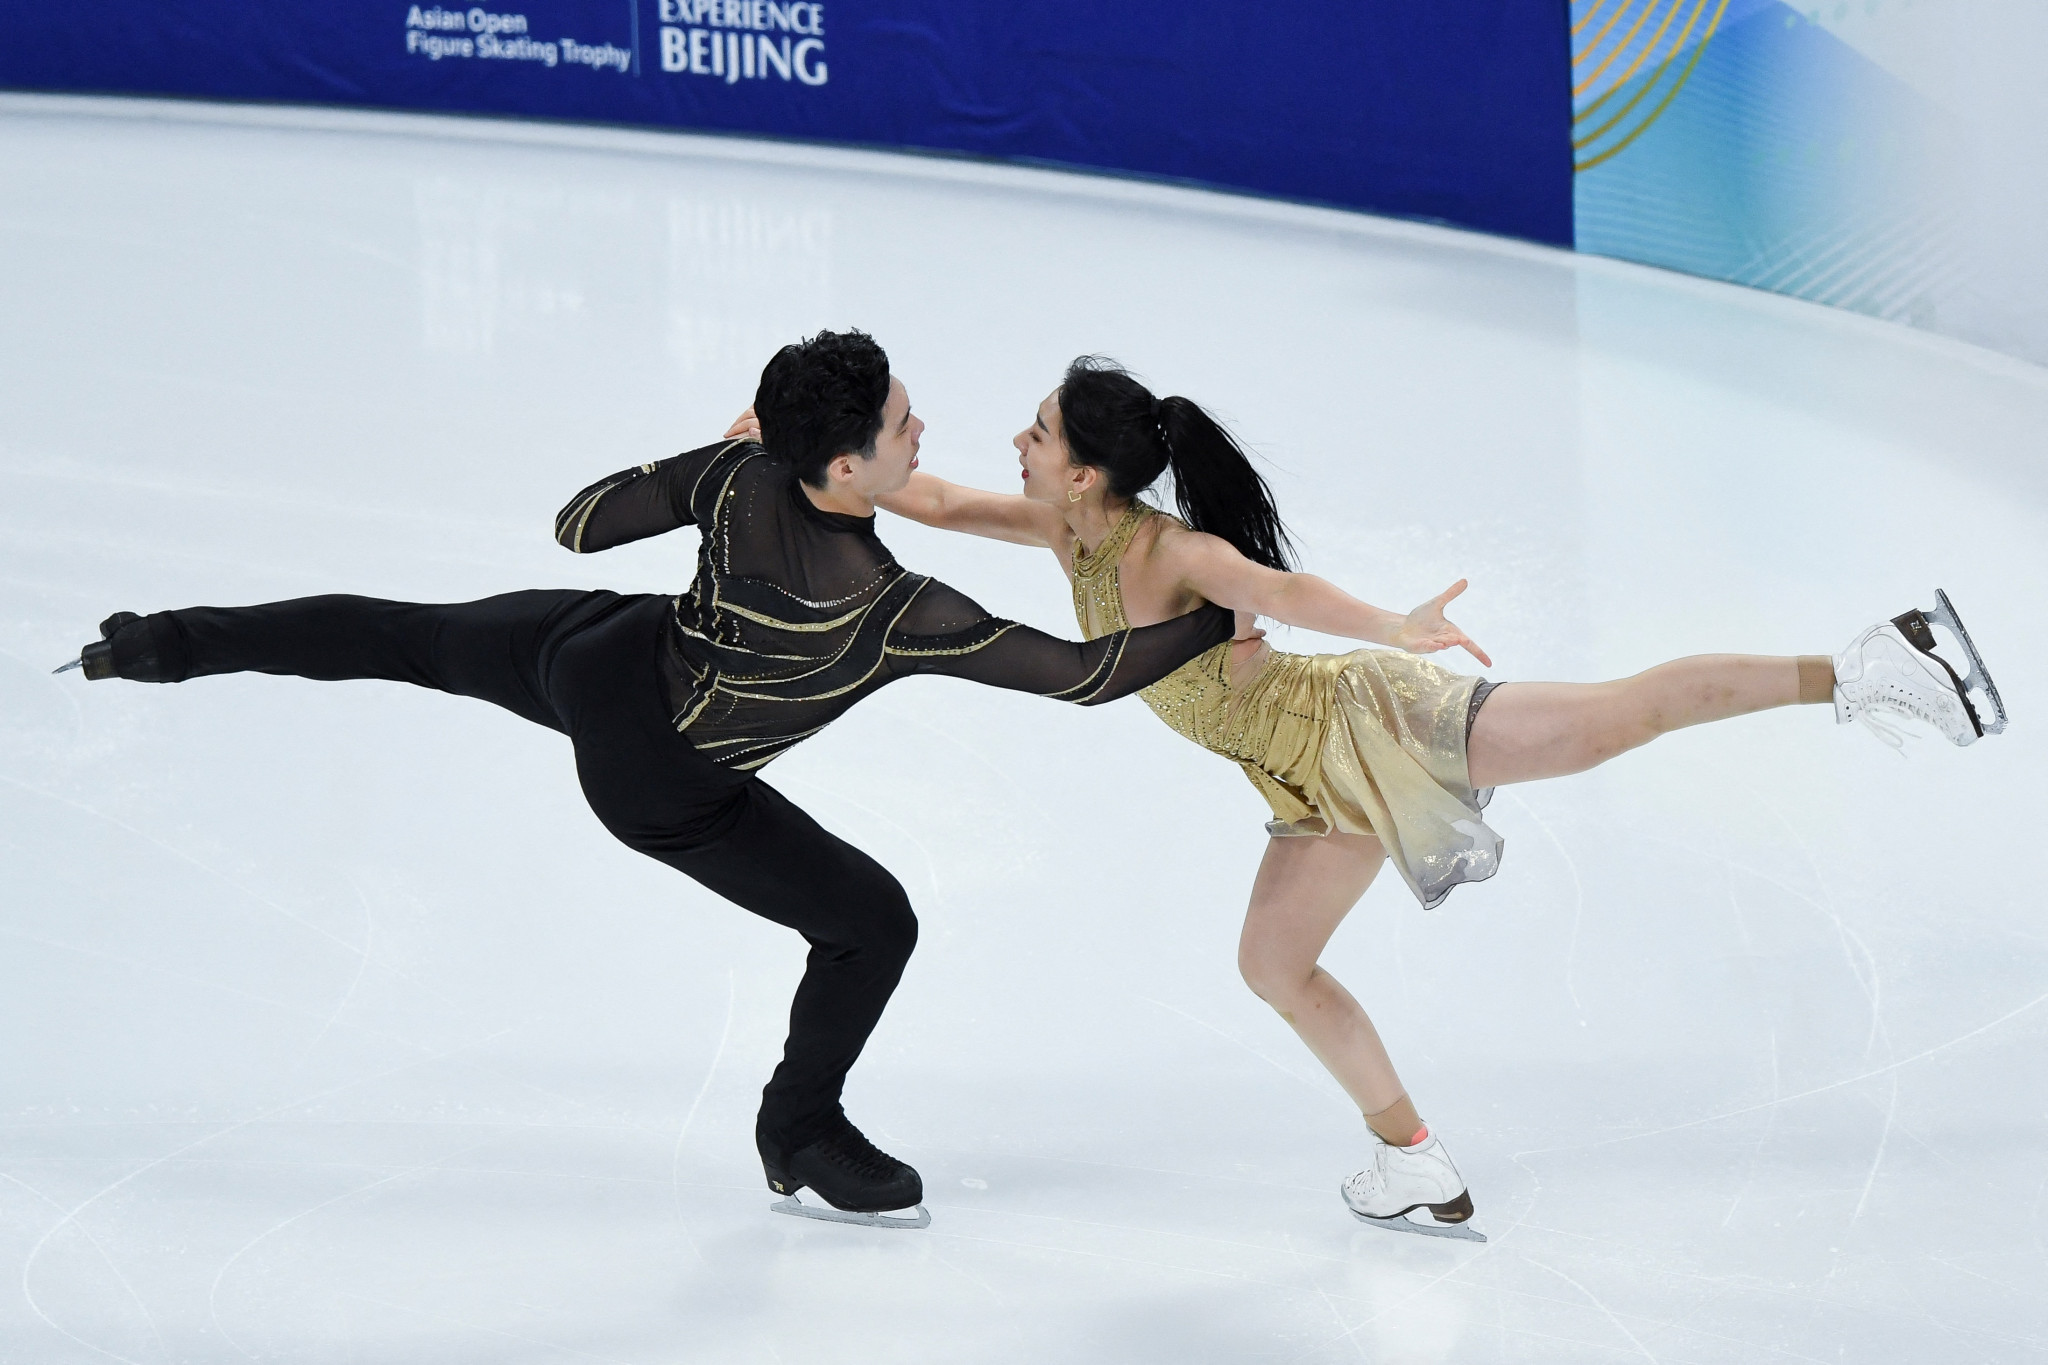 The Capital Indoor Stadium in Beijing held the Asian Open Figure Skating Trophy in October as a test event for next year's Winter Olympics ©Getty Images